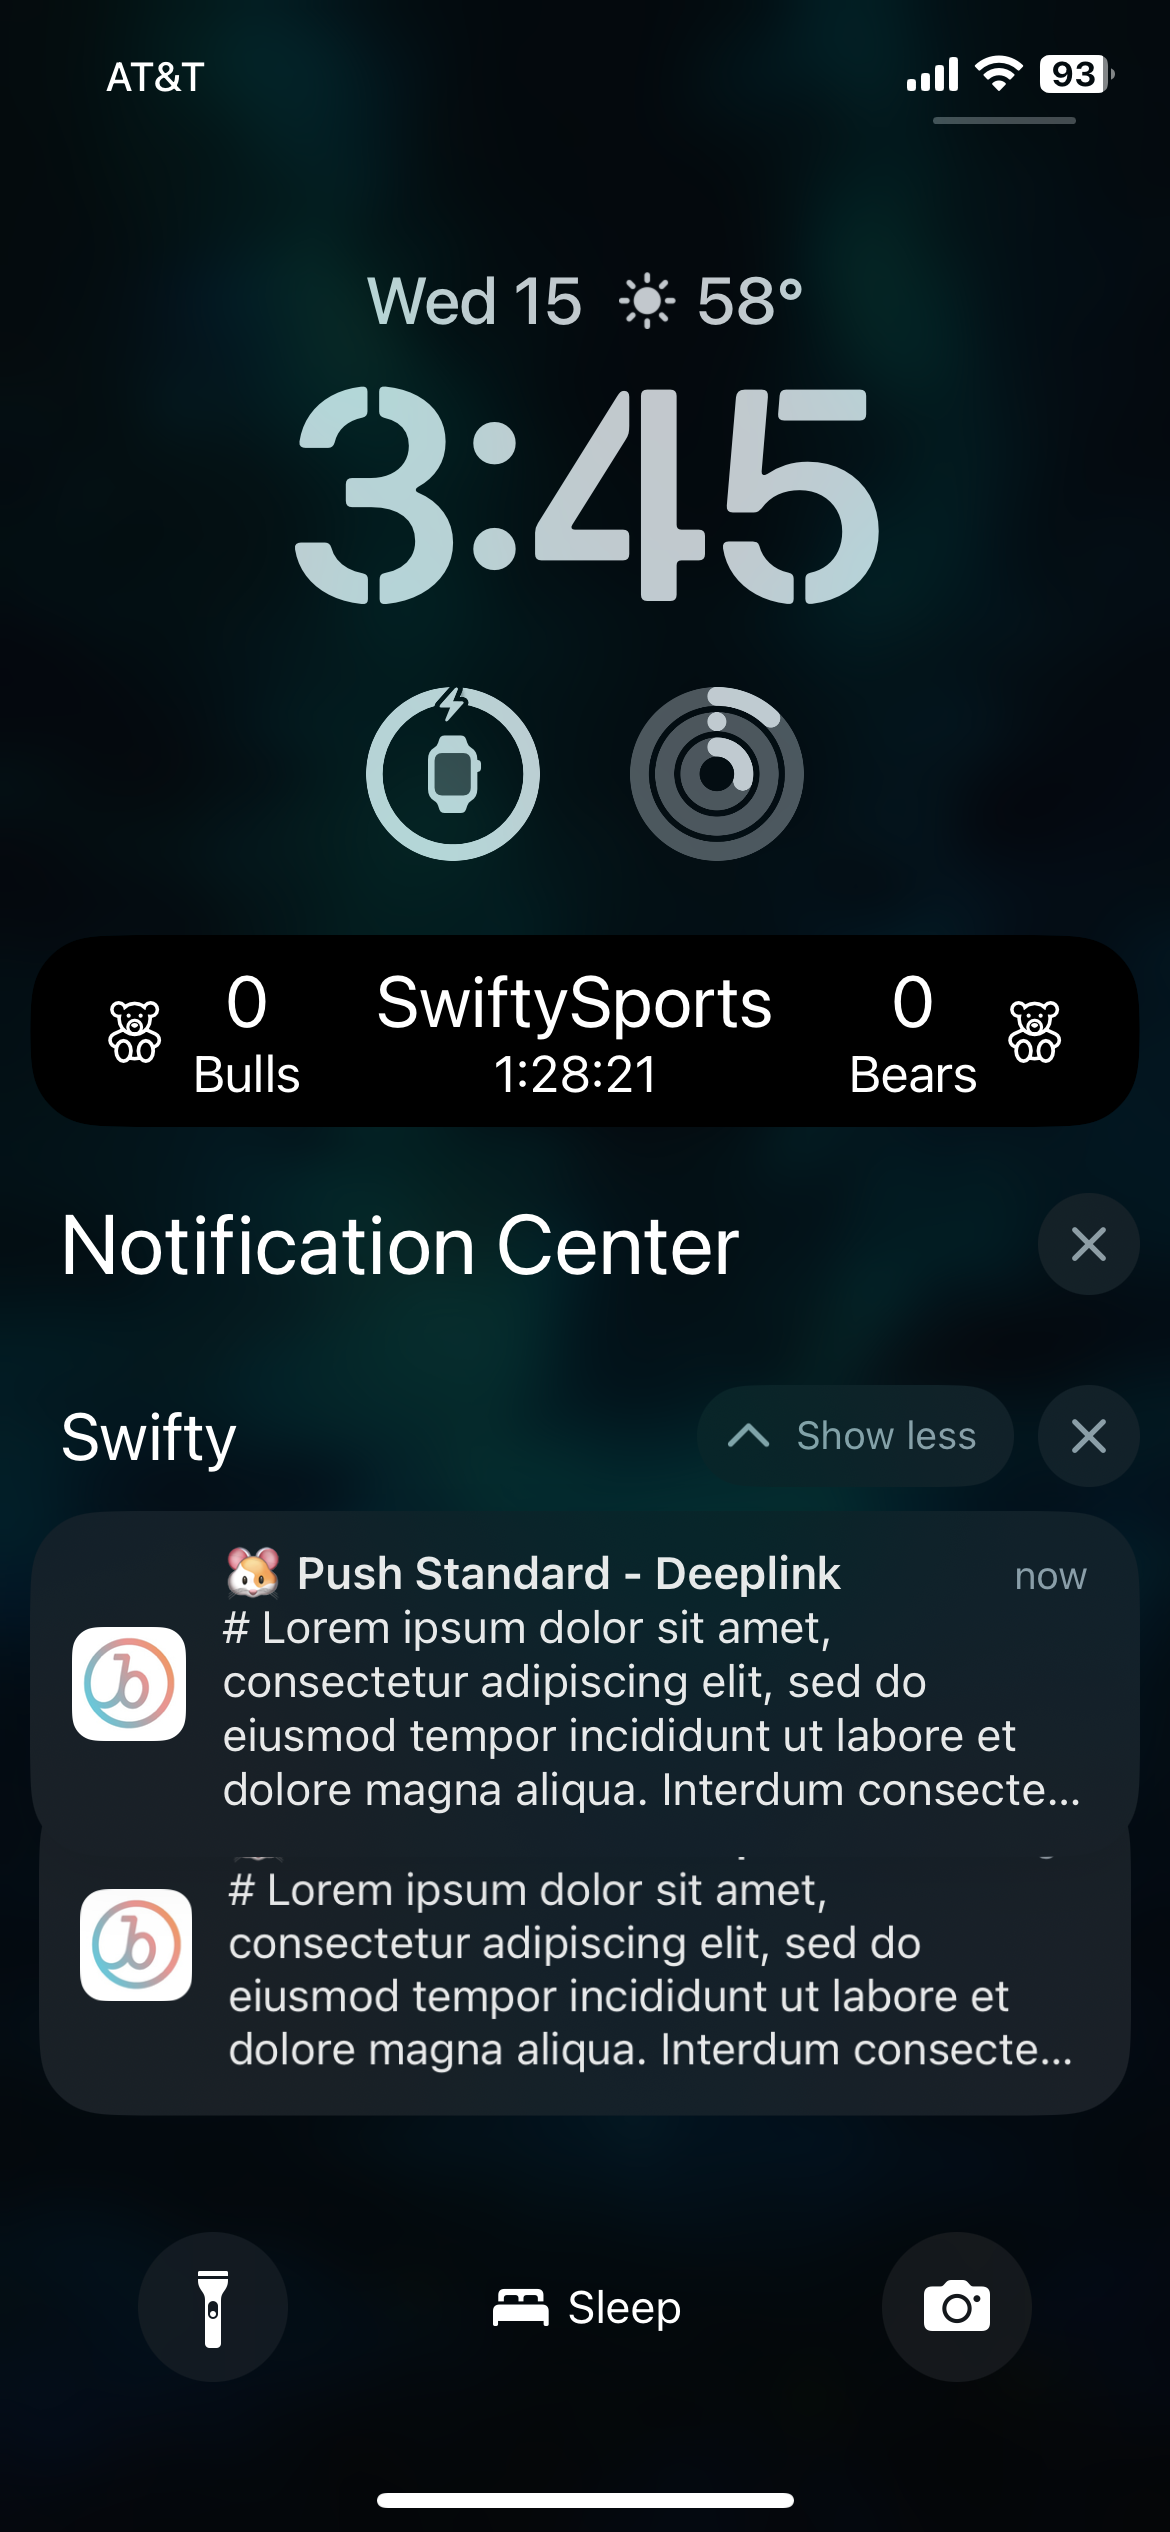 A phone screen with a Bulls vs Bears sports game live activity towards the middle of the screen and push notification lorem ipsum text at the bottom of the screen.